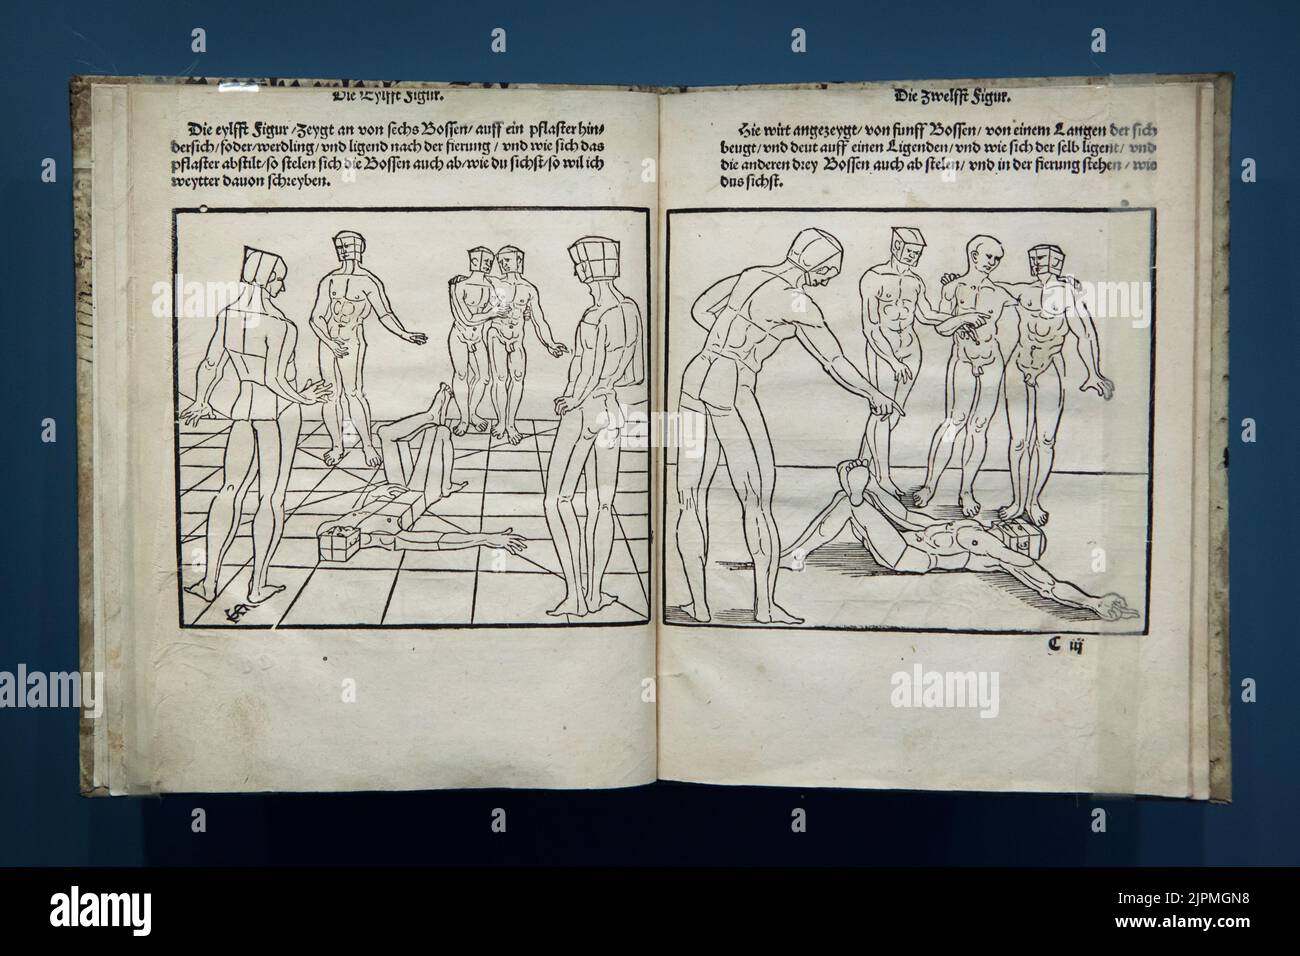 Two woodcuts by German Renaissance artist Erhard Schön (1543) in his book entitled 'Underweissung der Proportzion und stellung der possen' ('Instruction of Proportion and Position of Poses') printed by Christoff Zell (1543) in Nürnberg, Germany. Stock Photo